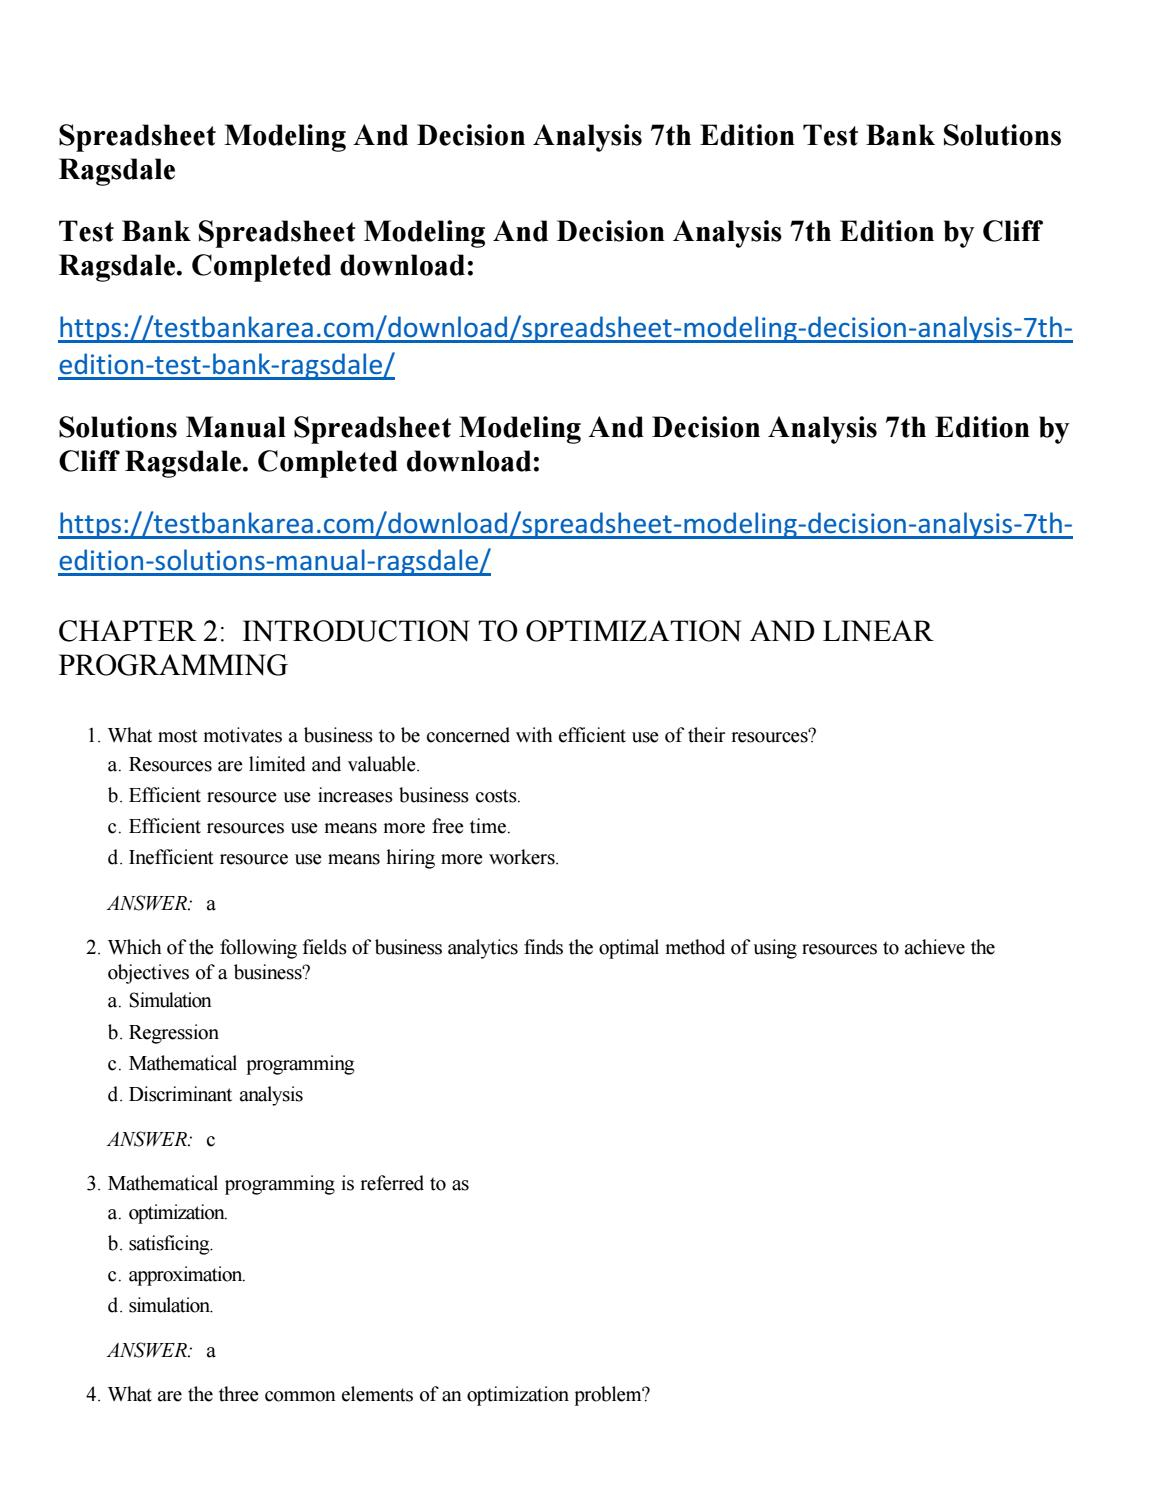 Spreadsheet Modeling And Decision Analysis Pdf 7Th Edition Intended For Spreadsheet Modeling And Decision Analysis 7Th Edition Test Bank